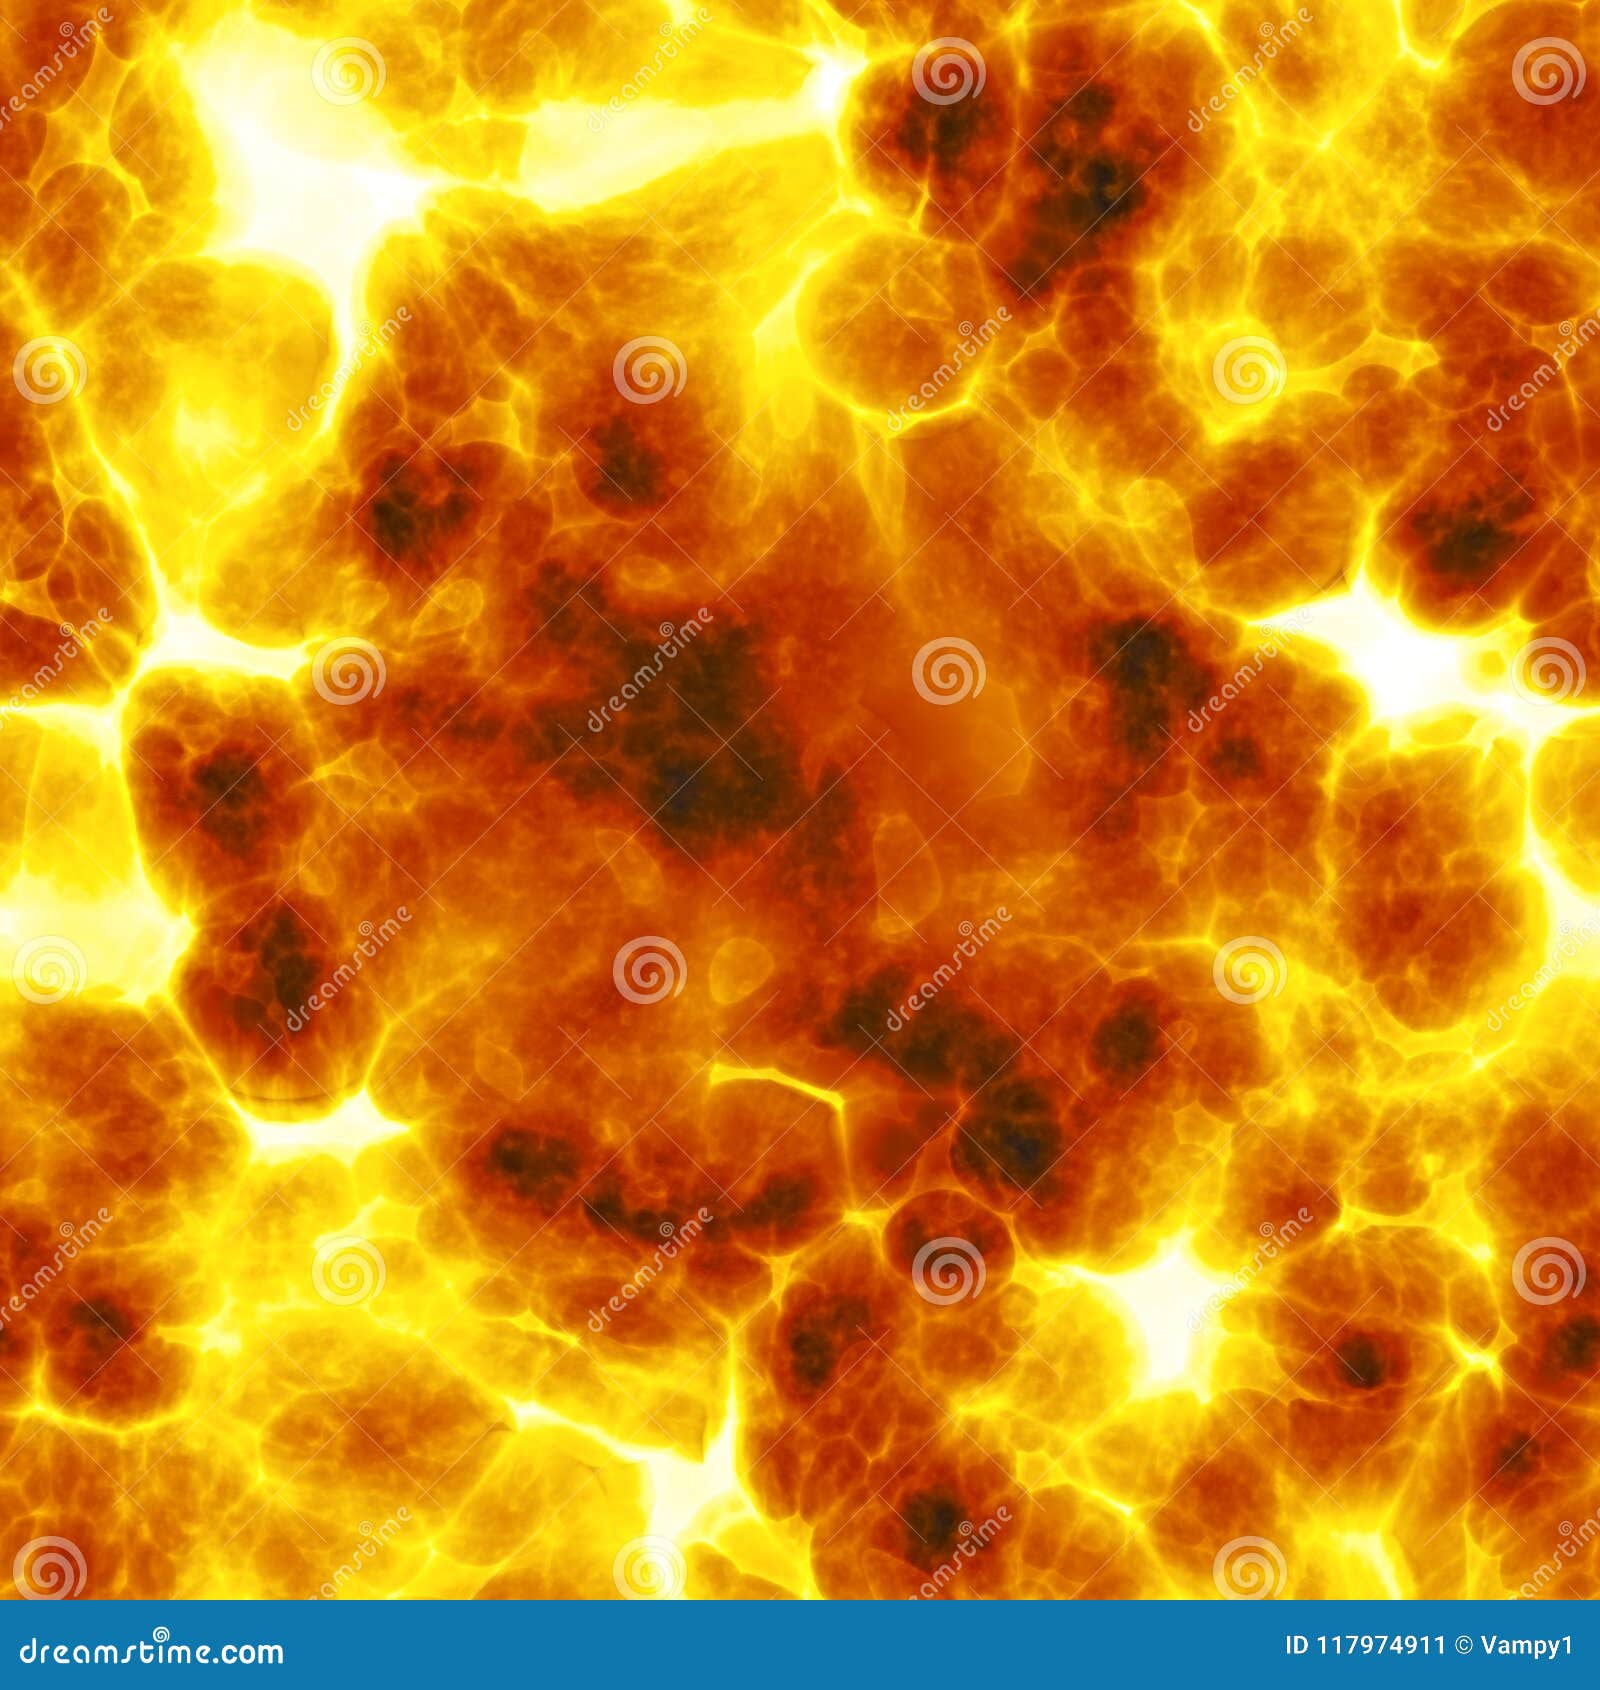 Texture Of The Sun Flames And Fire Background Burn Stock